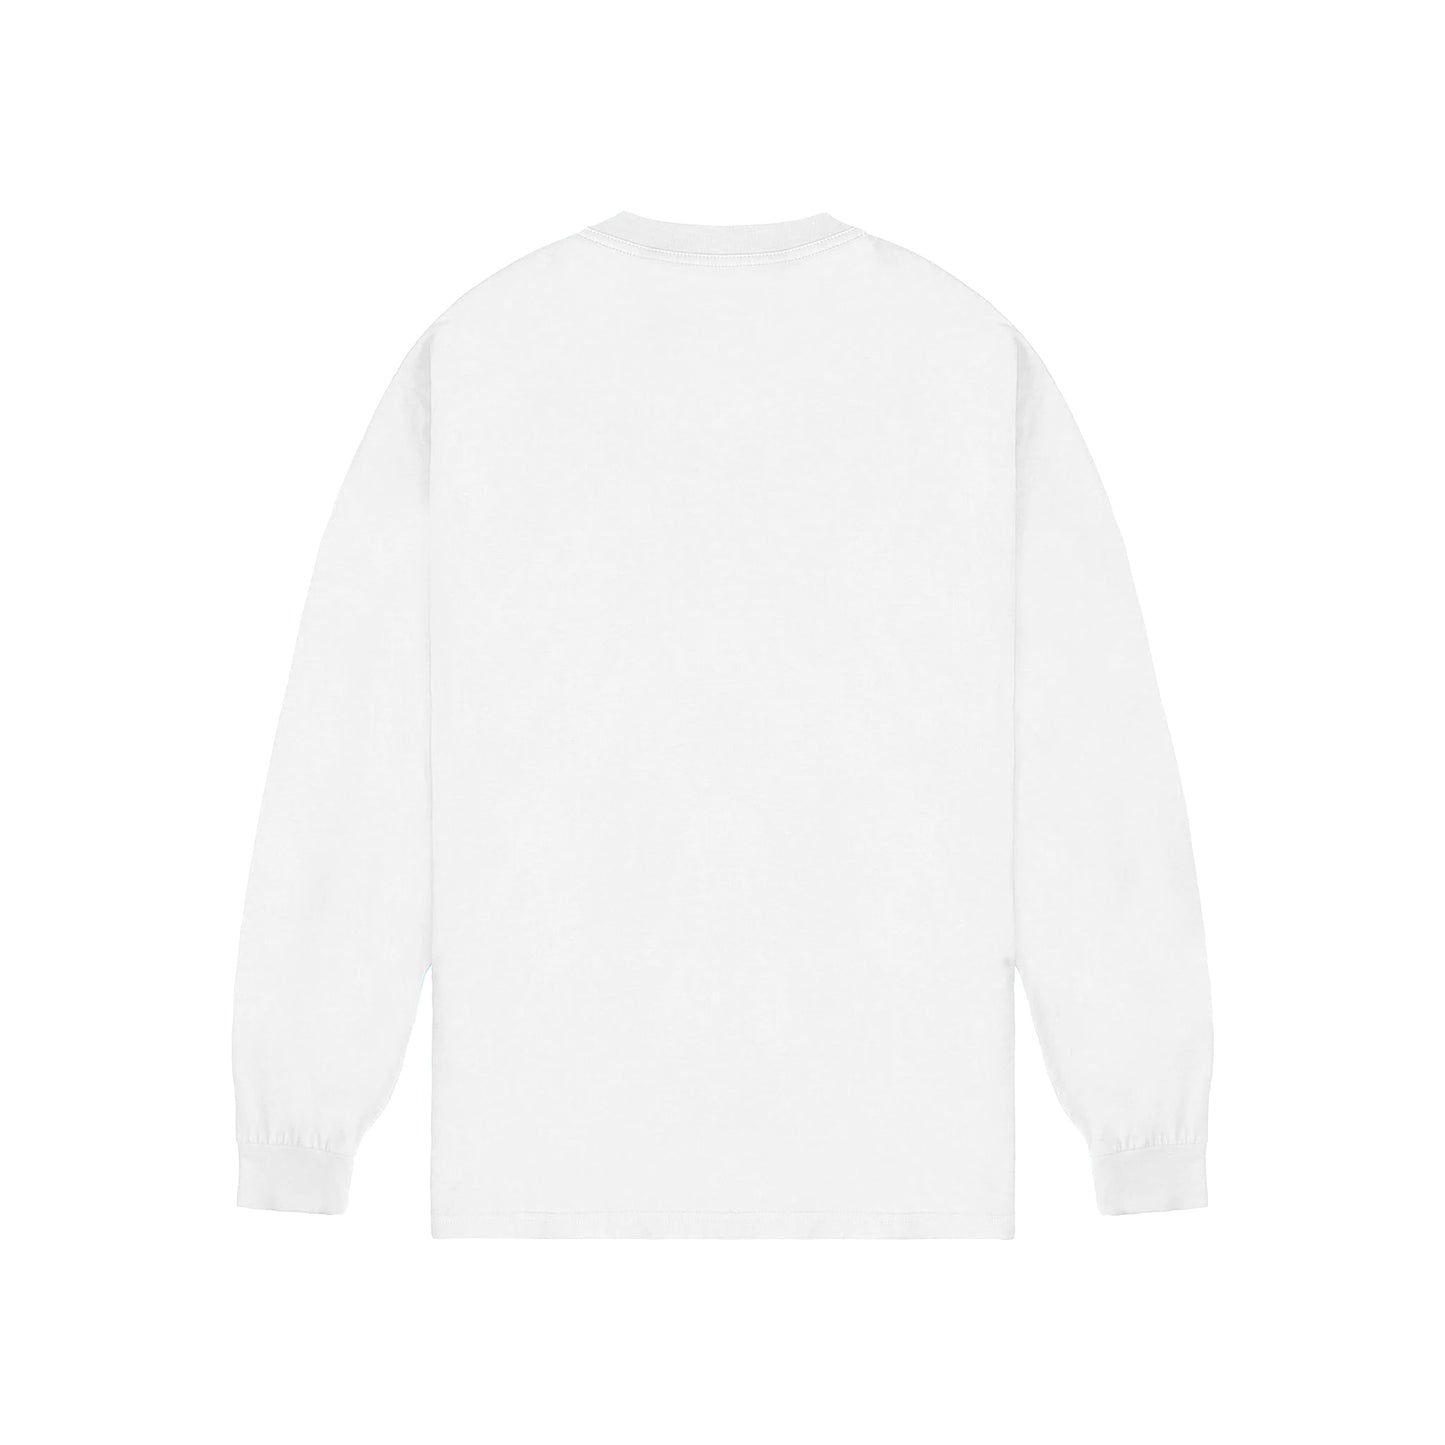 KIDS PANTHER L/SLEEVE TEE - WHITE